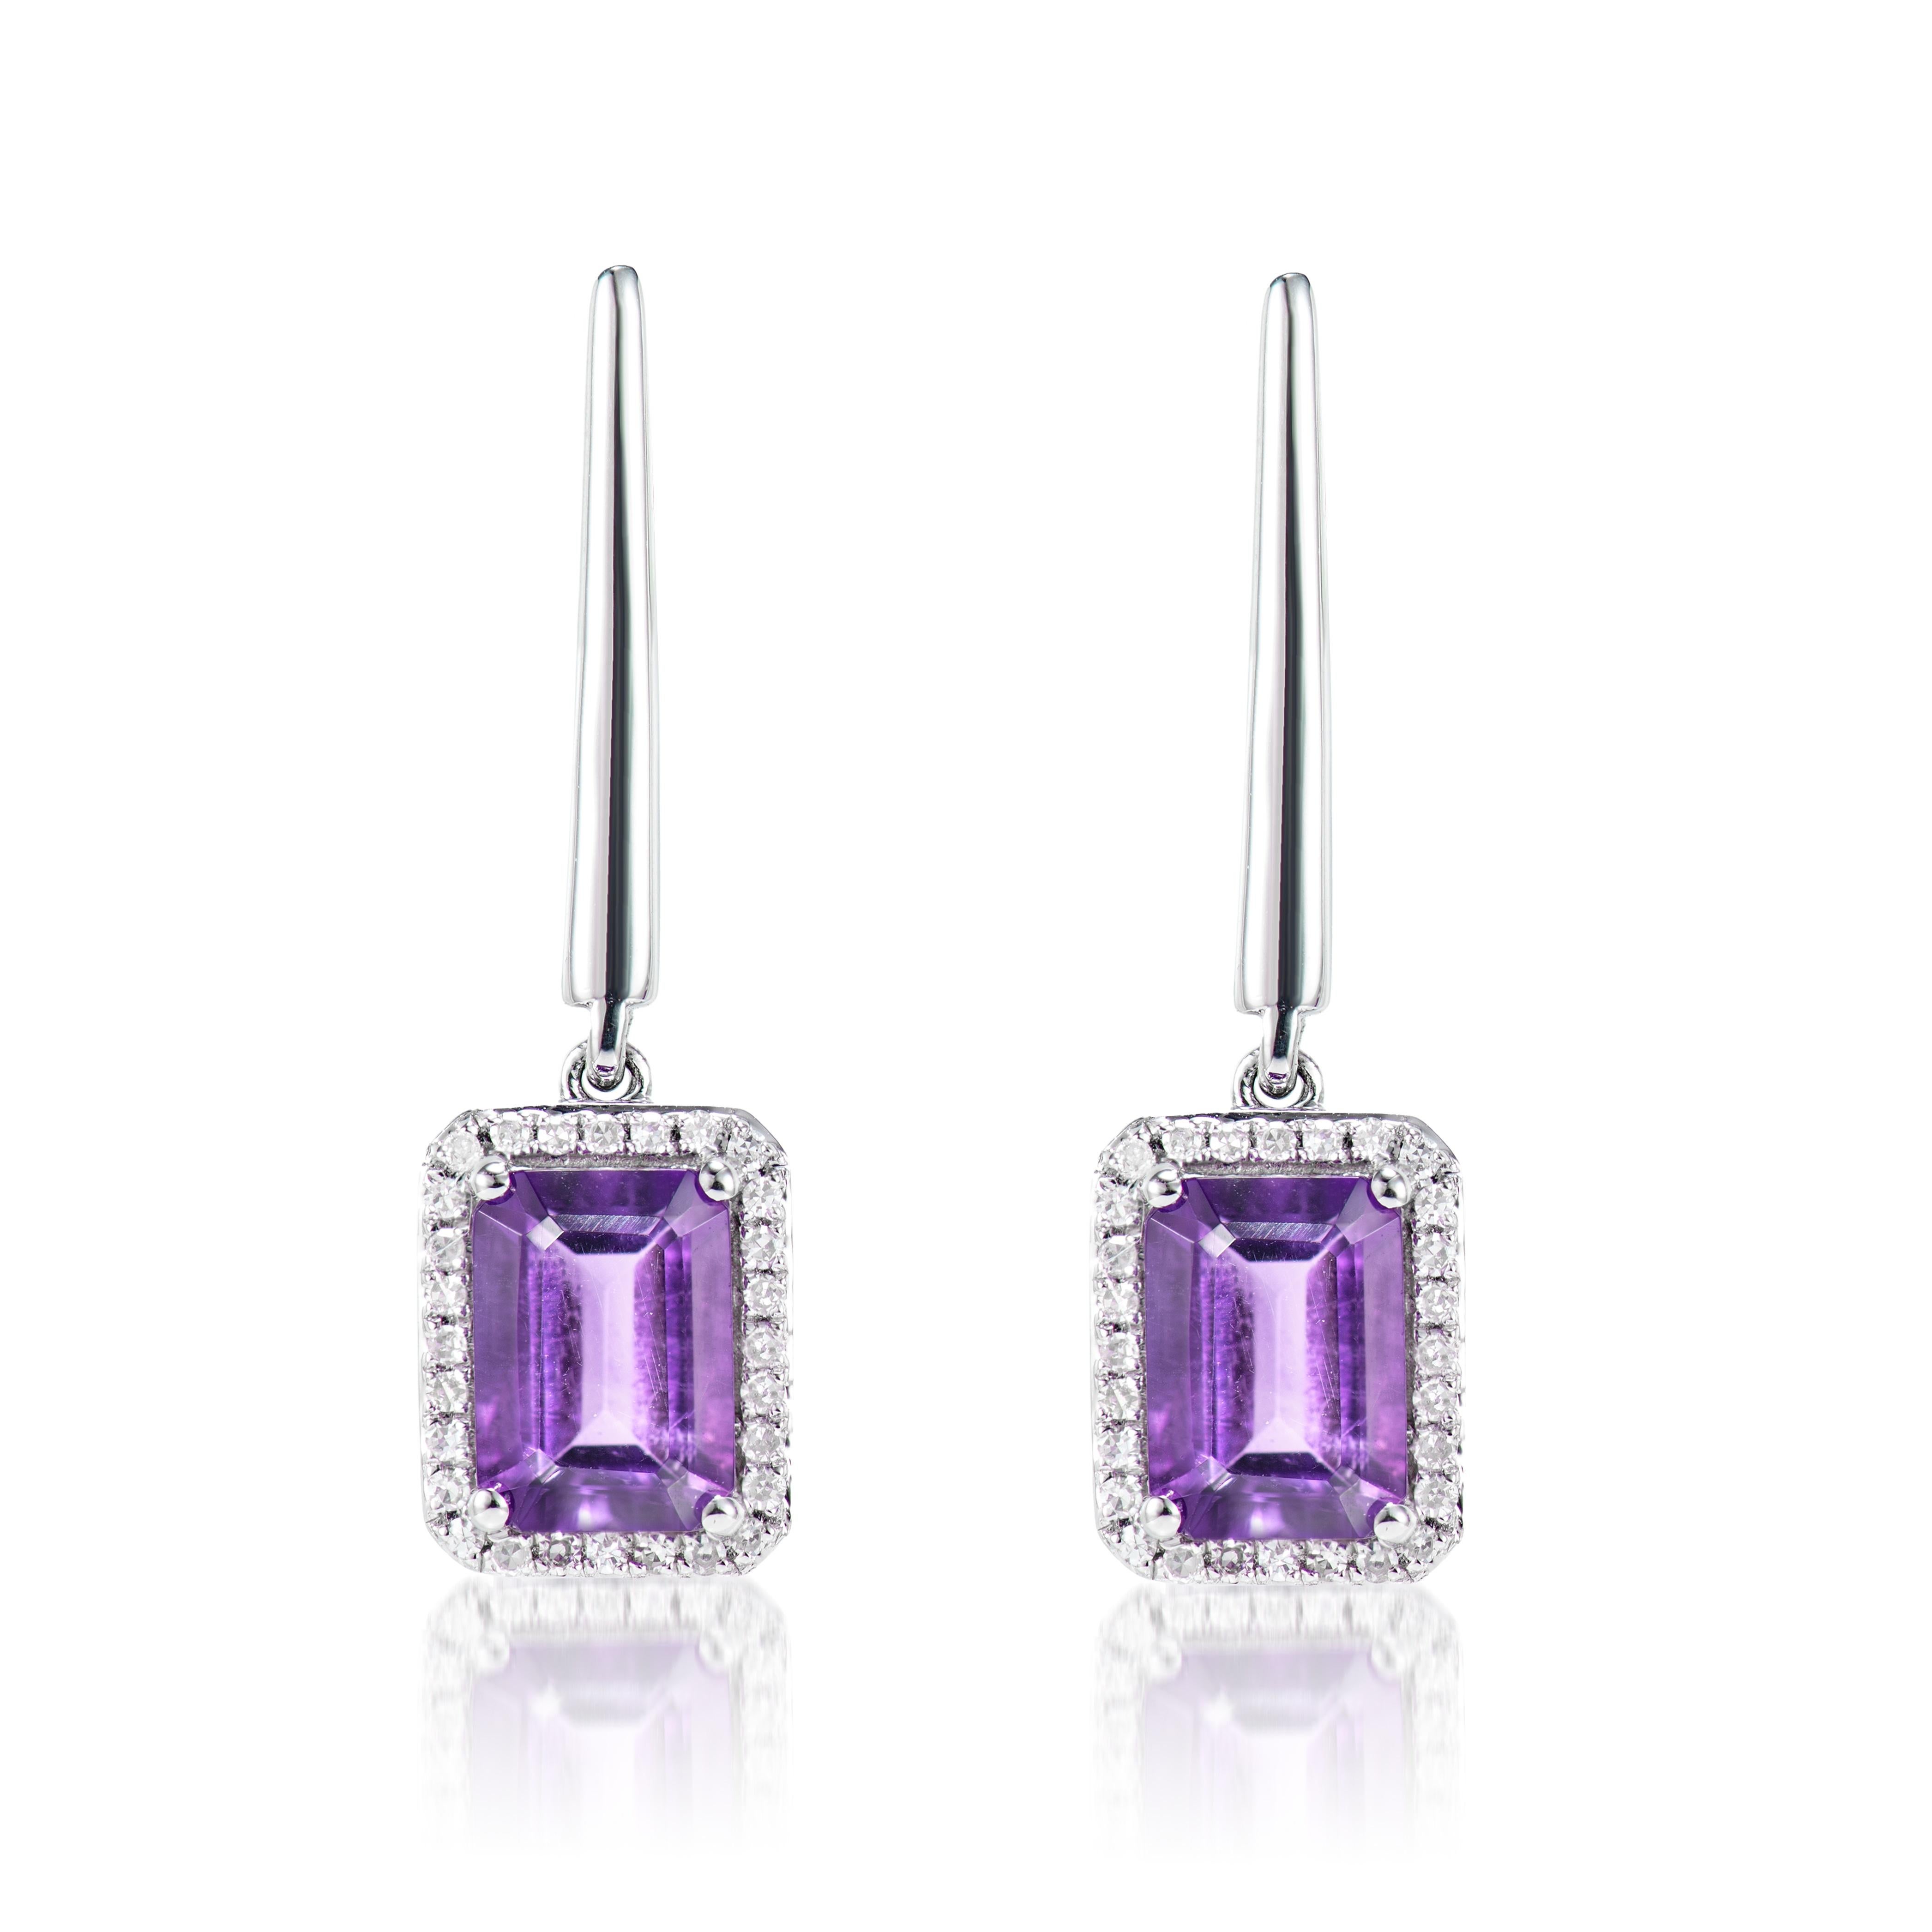 Contemporary 1.76 Carat Amethyst Drop Earrings in 18Karat White Gold with White Diamond. For Sale